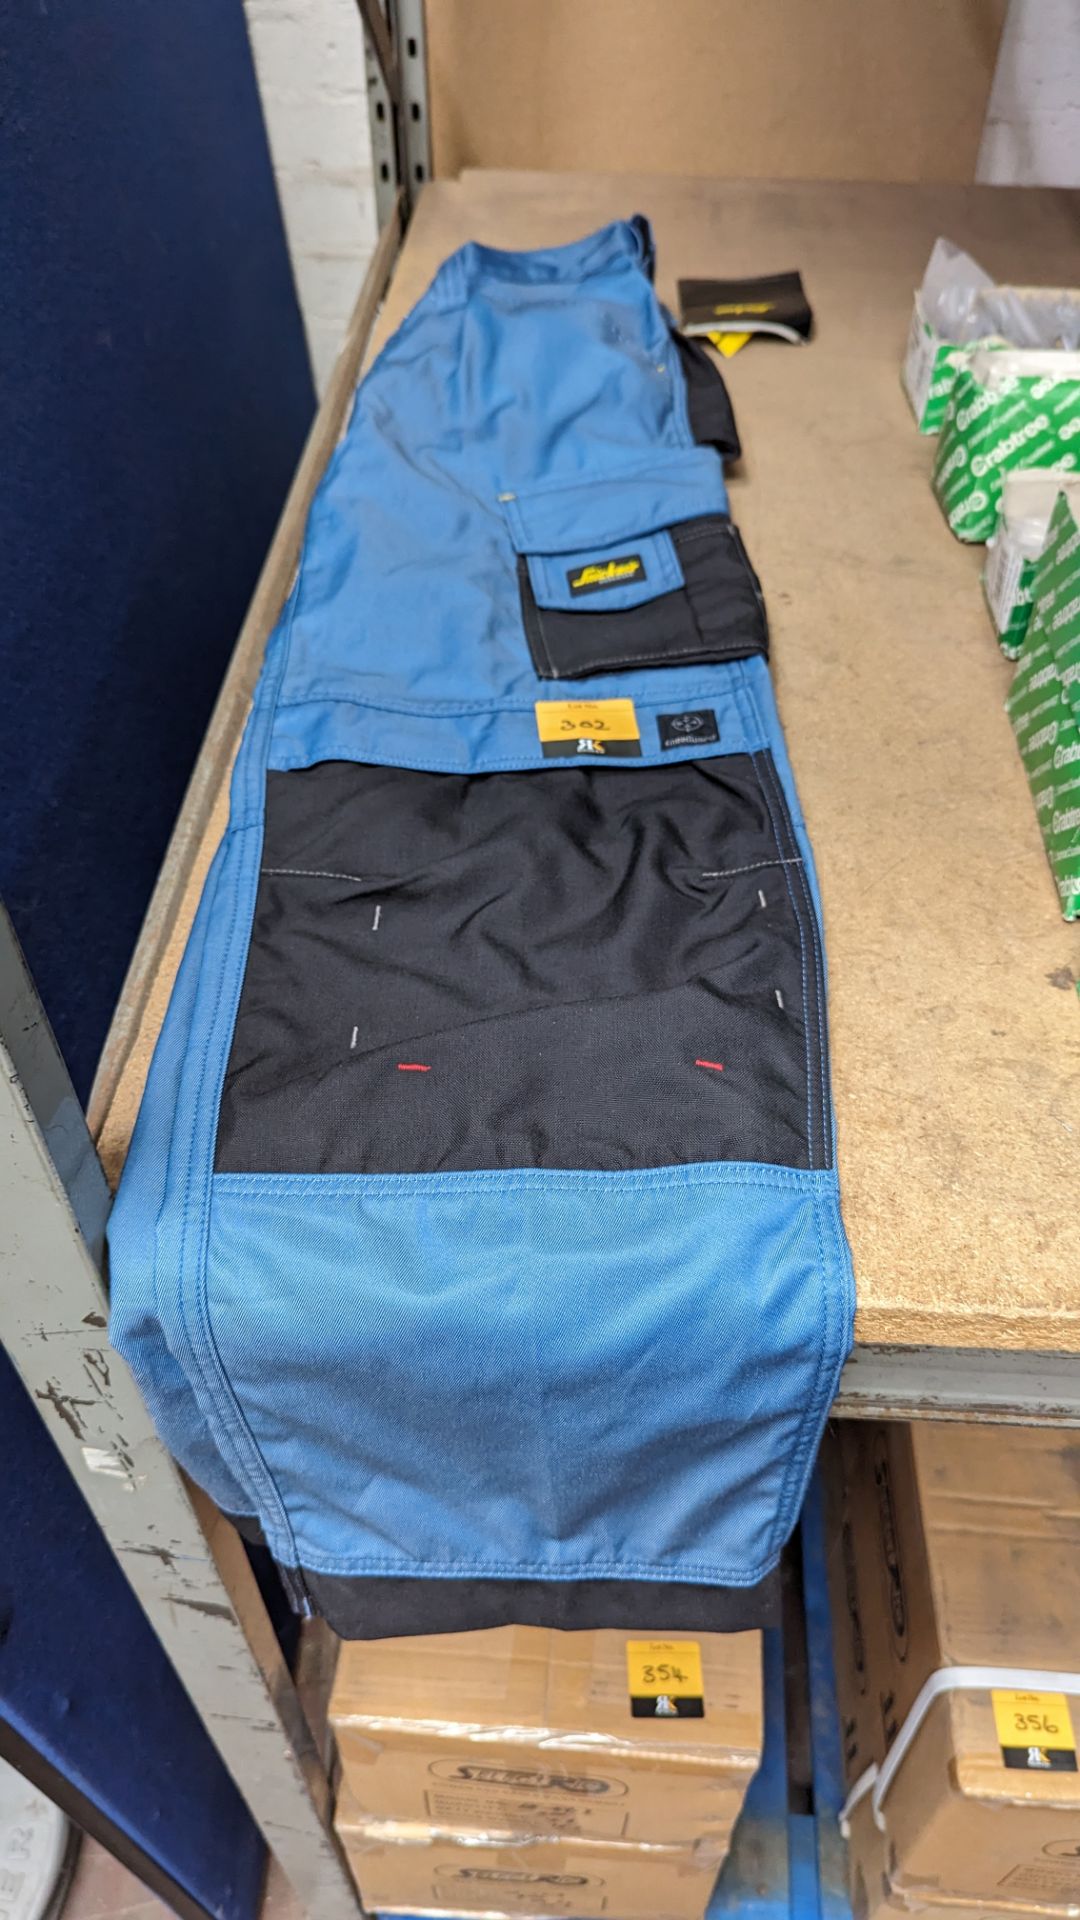 Pair of Snickers work trousers size 048, colour ocean/black 1704, craftsmen trouser dura twill - Image 2 of 6